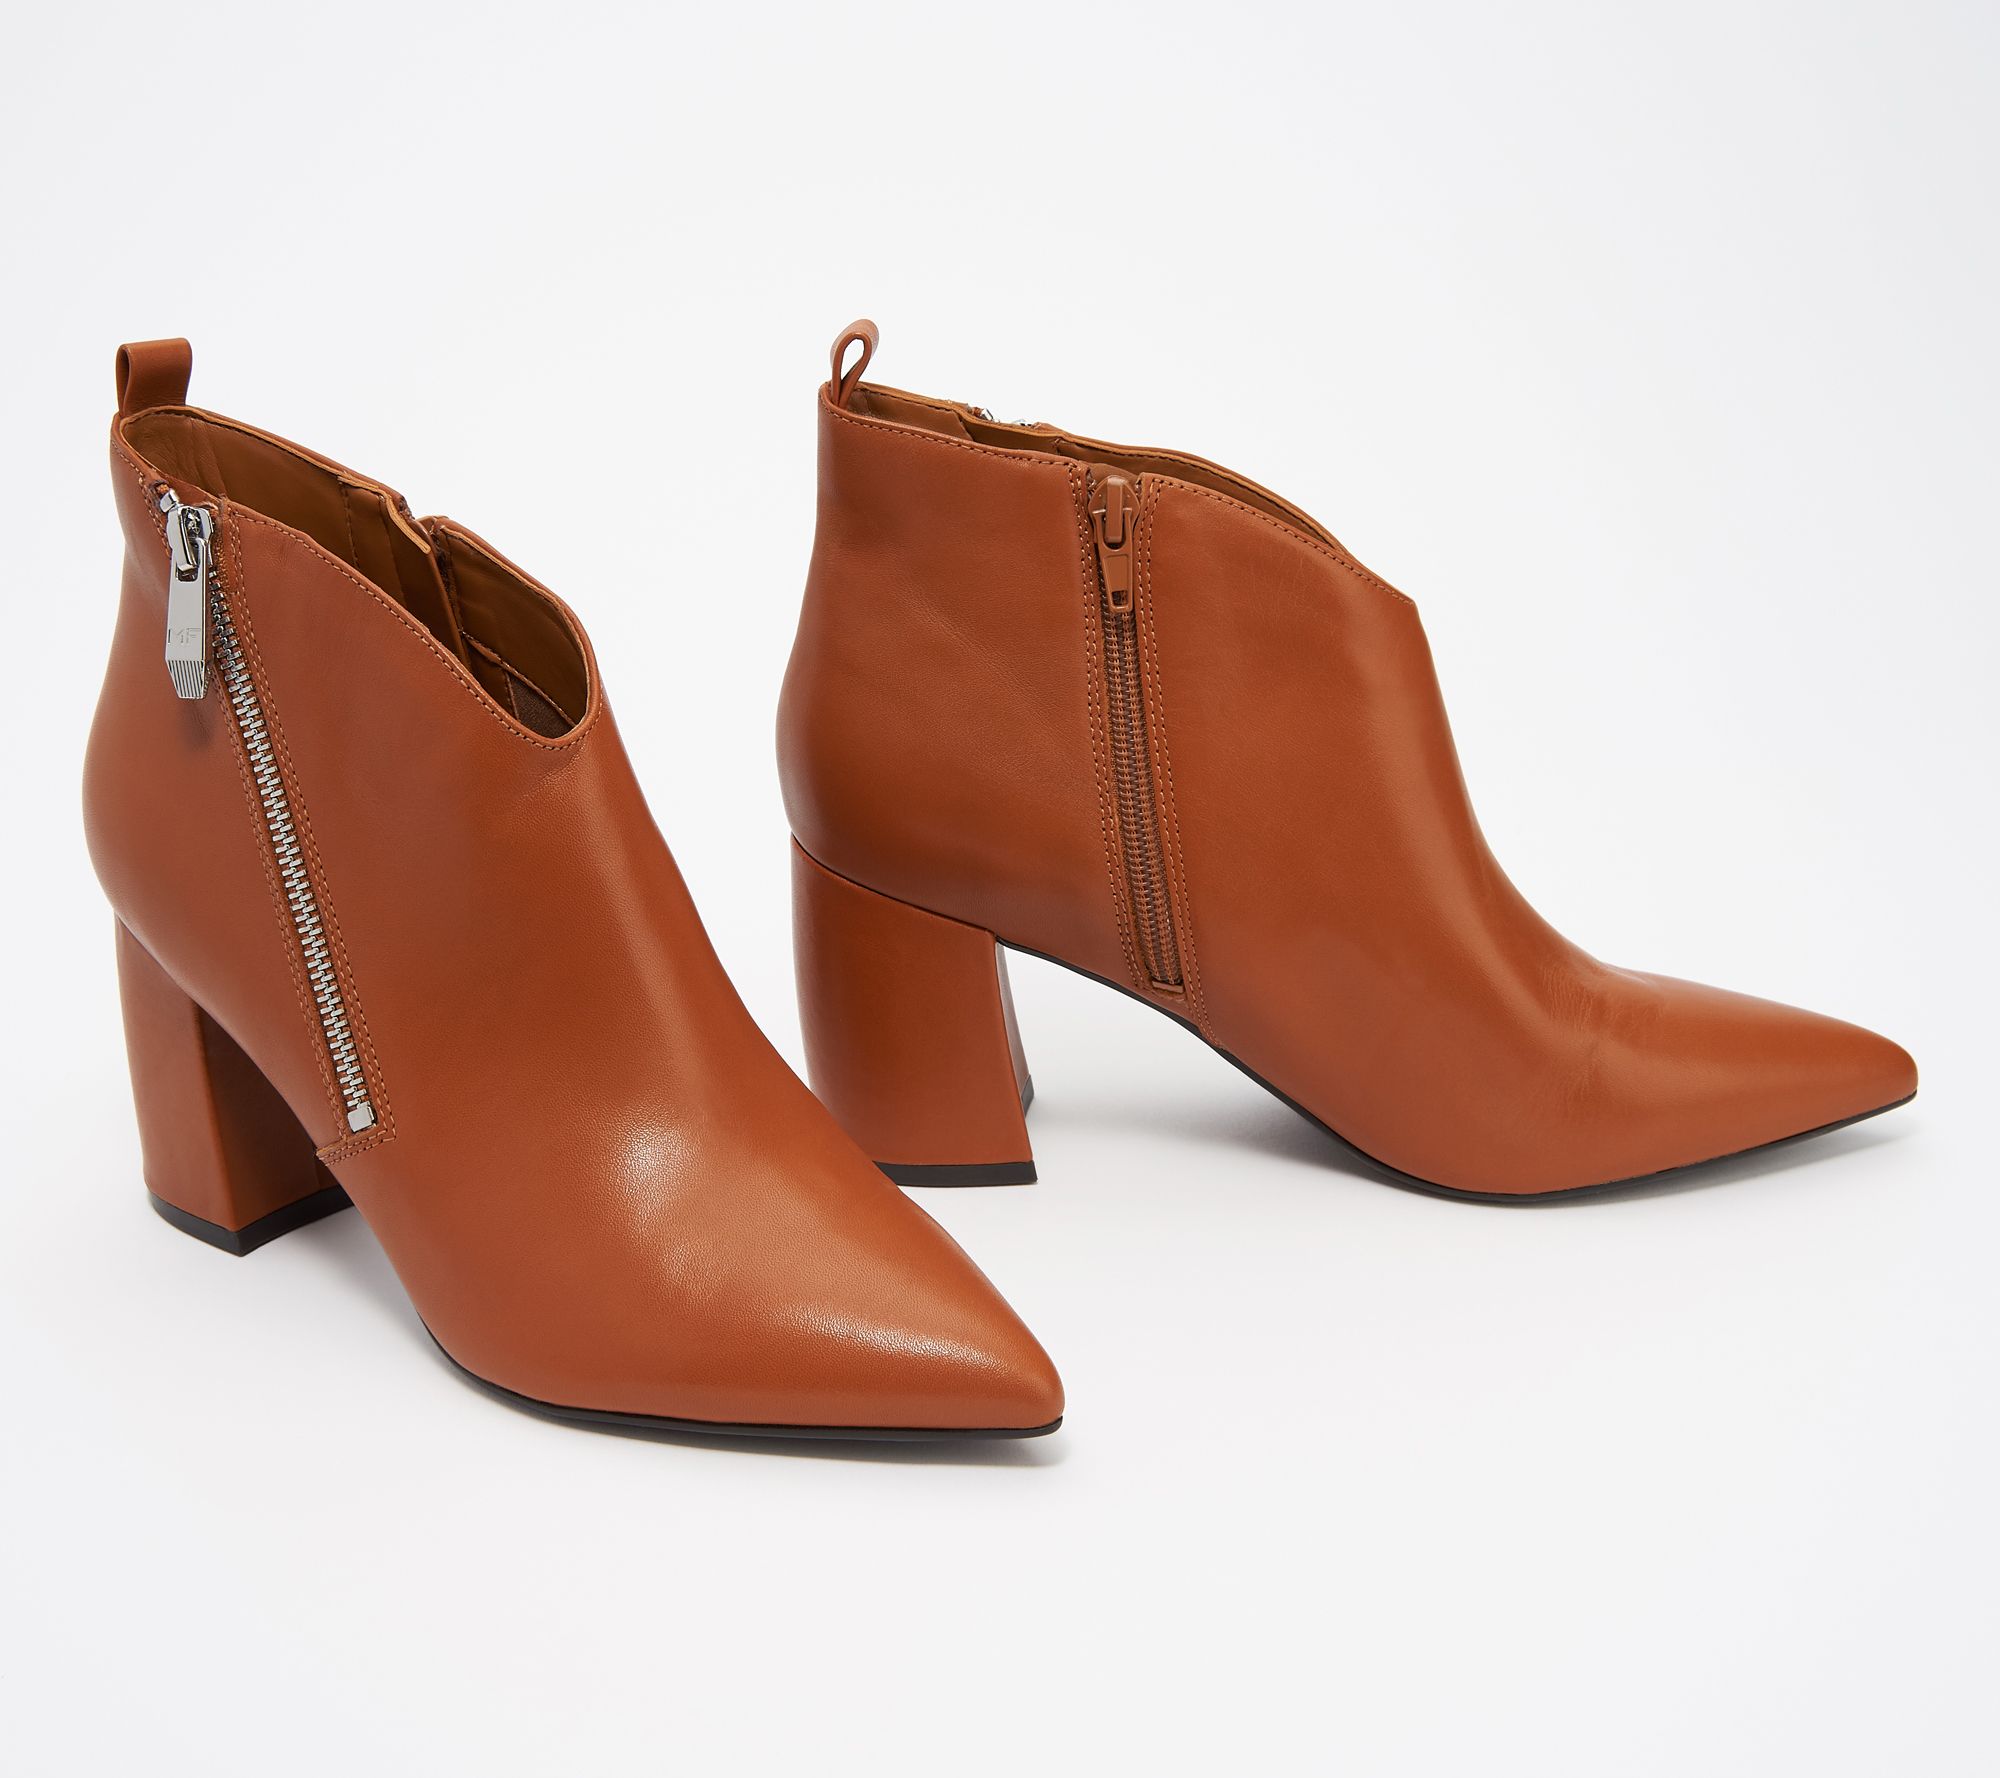 marc fisher patent booties